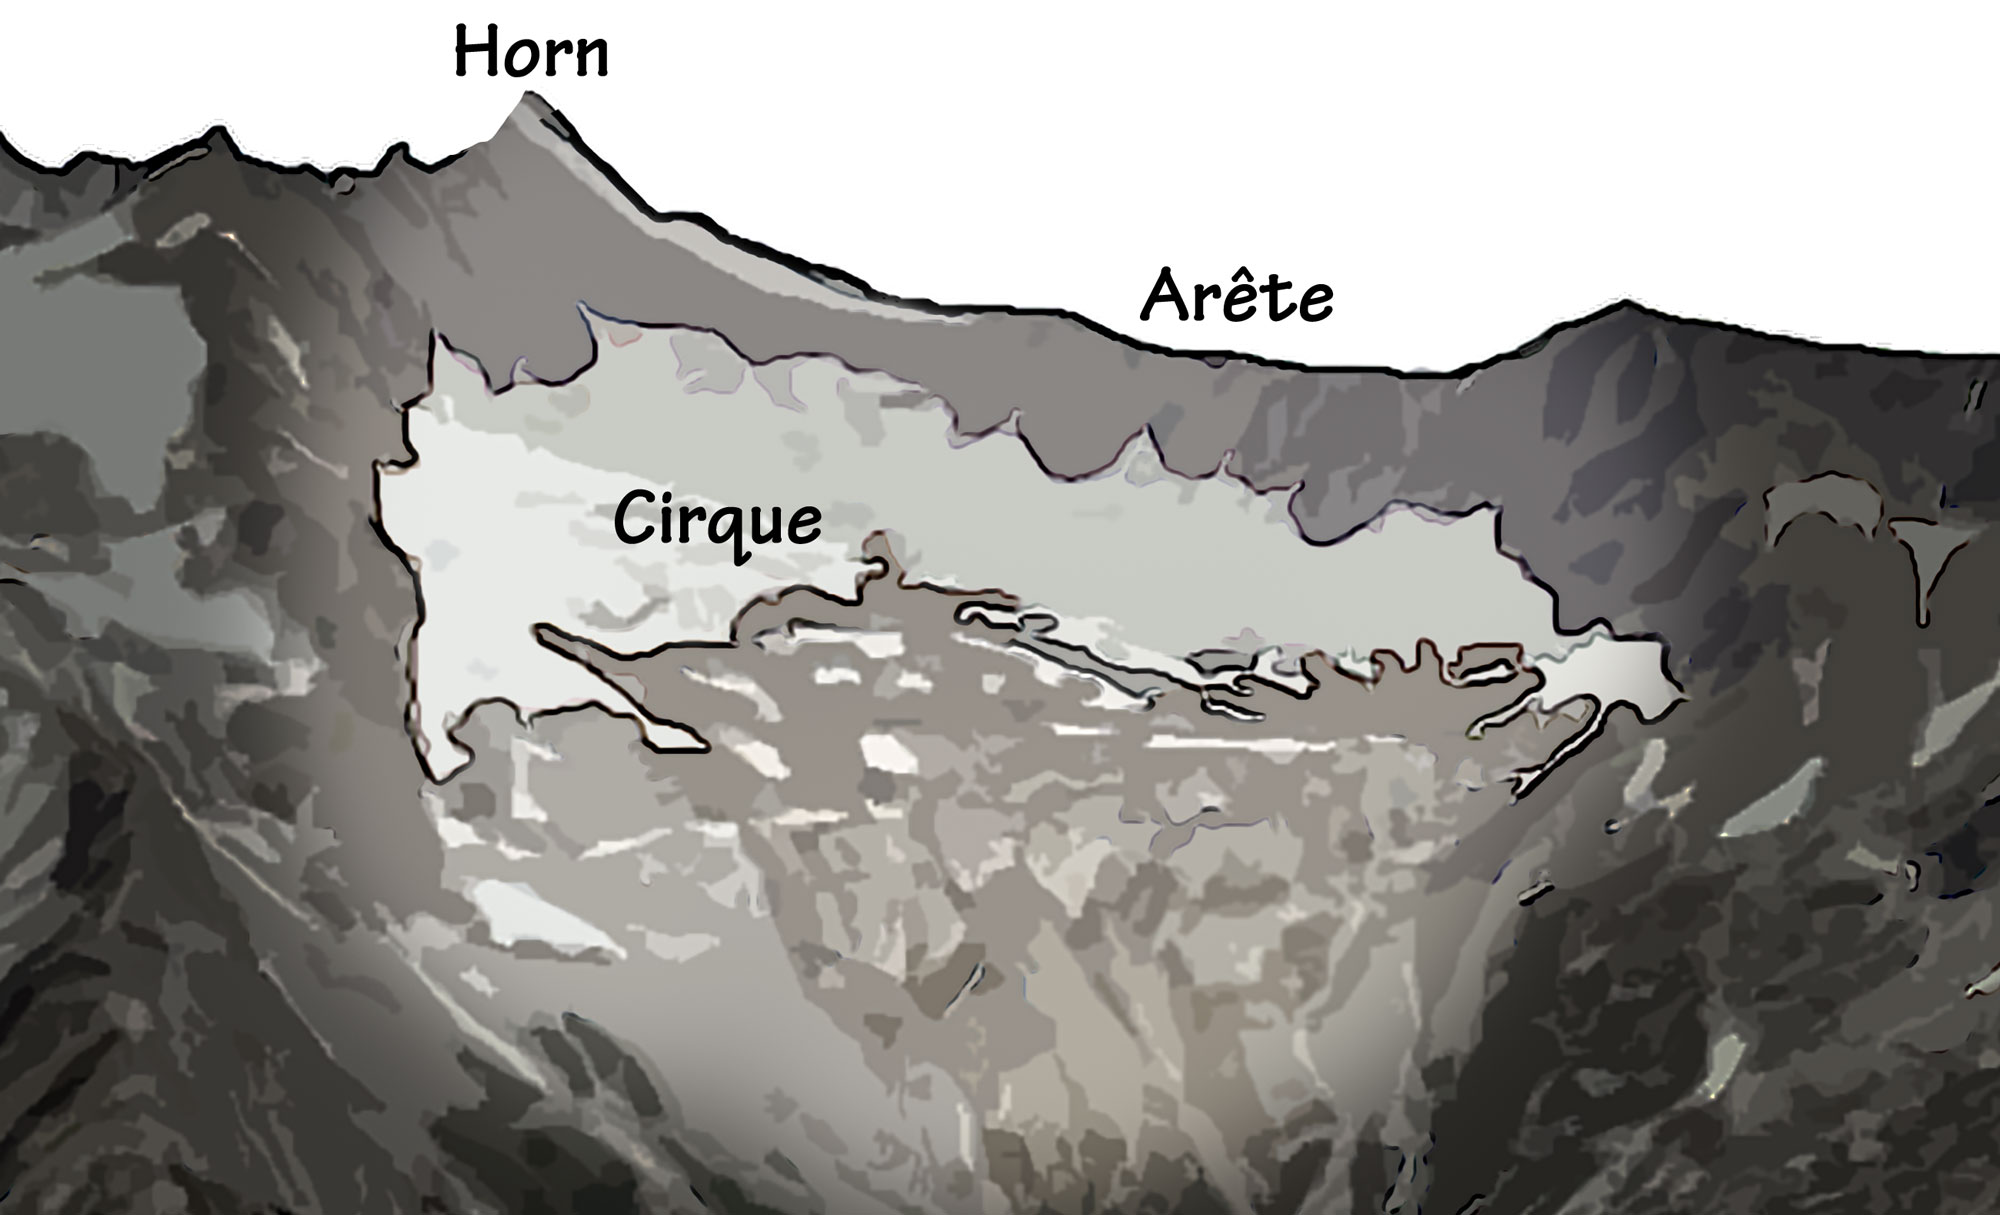 Illustration of glacial features in Cascade Pass, North Cascades National Park, Washington. The illustration shows a ridge with a slightly more prominent peak labeled "horn." To the right of the horn is a broad, shallow dip labeled "arête." Below the arête is a patch of snow labeled "cirque."